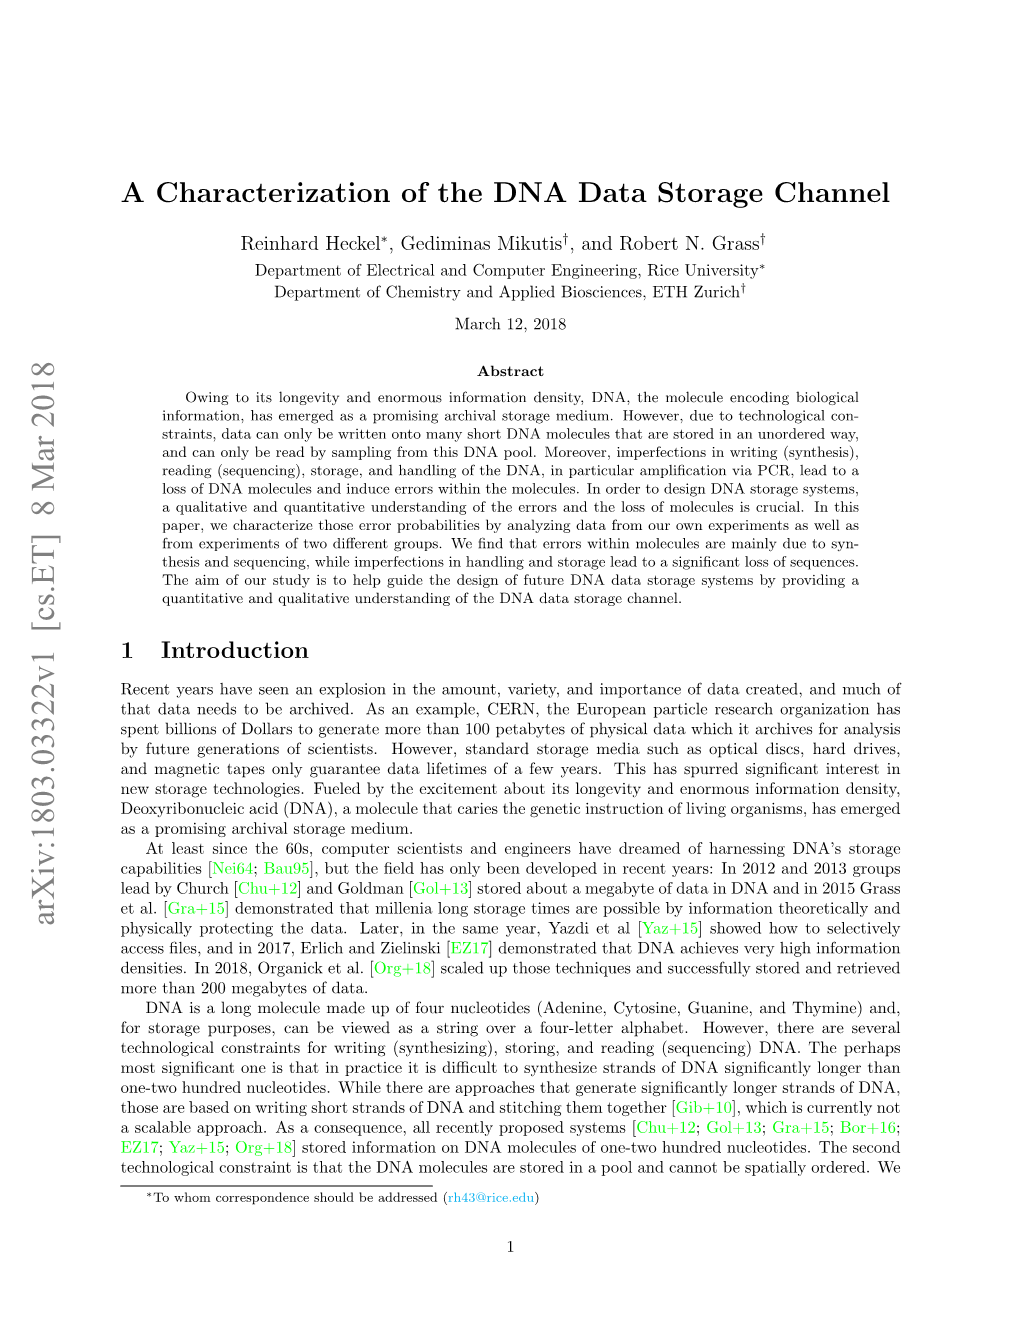 A Characterization of the DNA Data Storage Channel